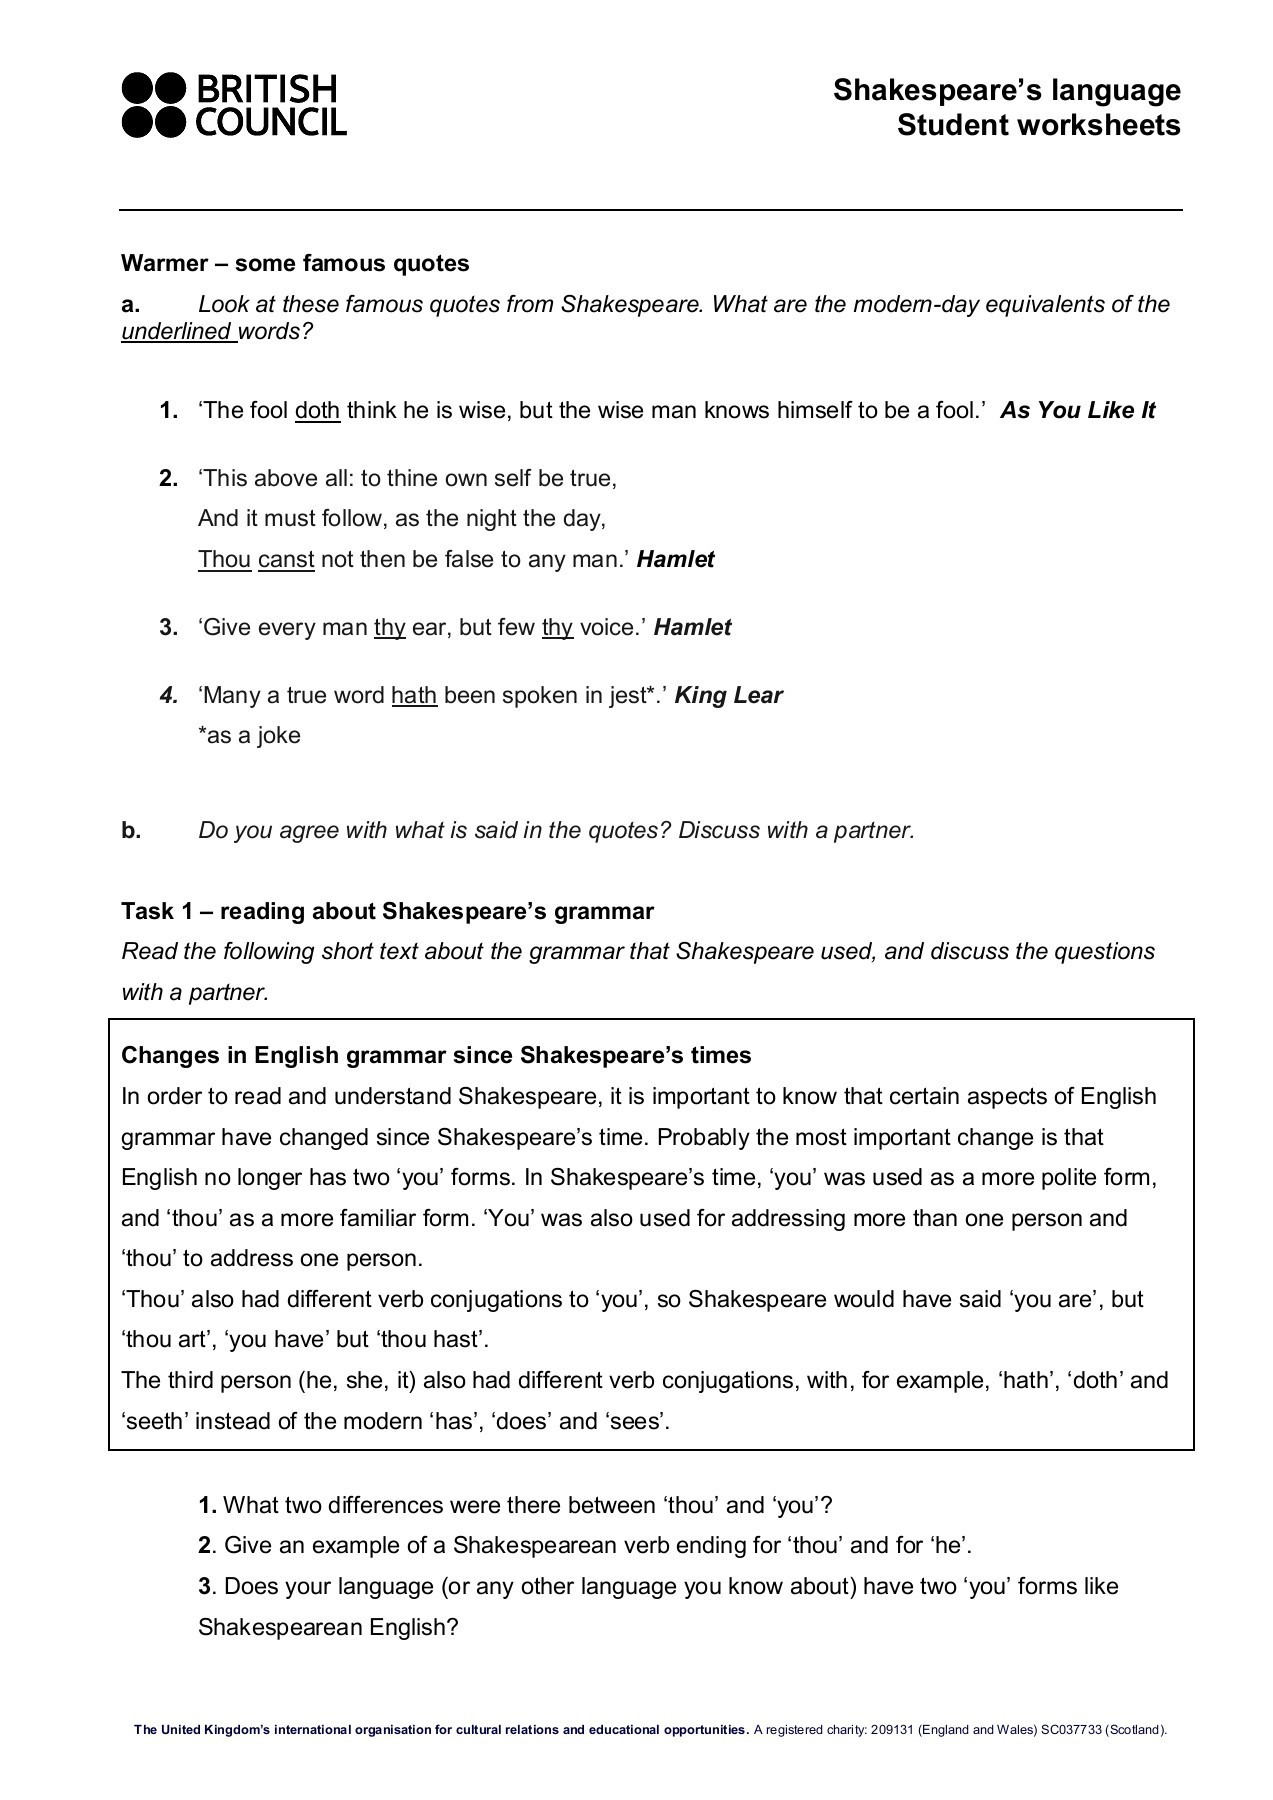 Shakespeare's Language Student Worksheets Pages 1  4  Text